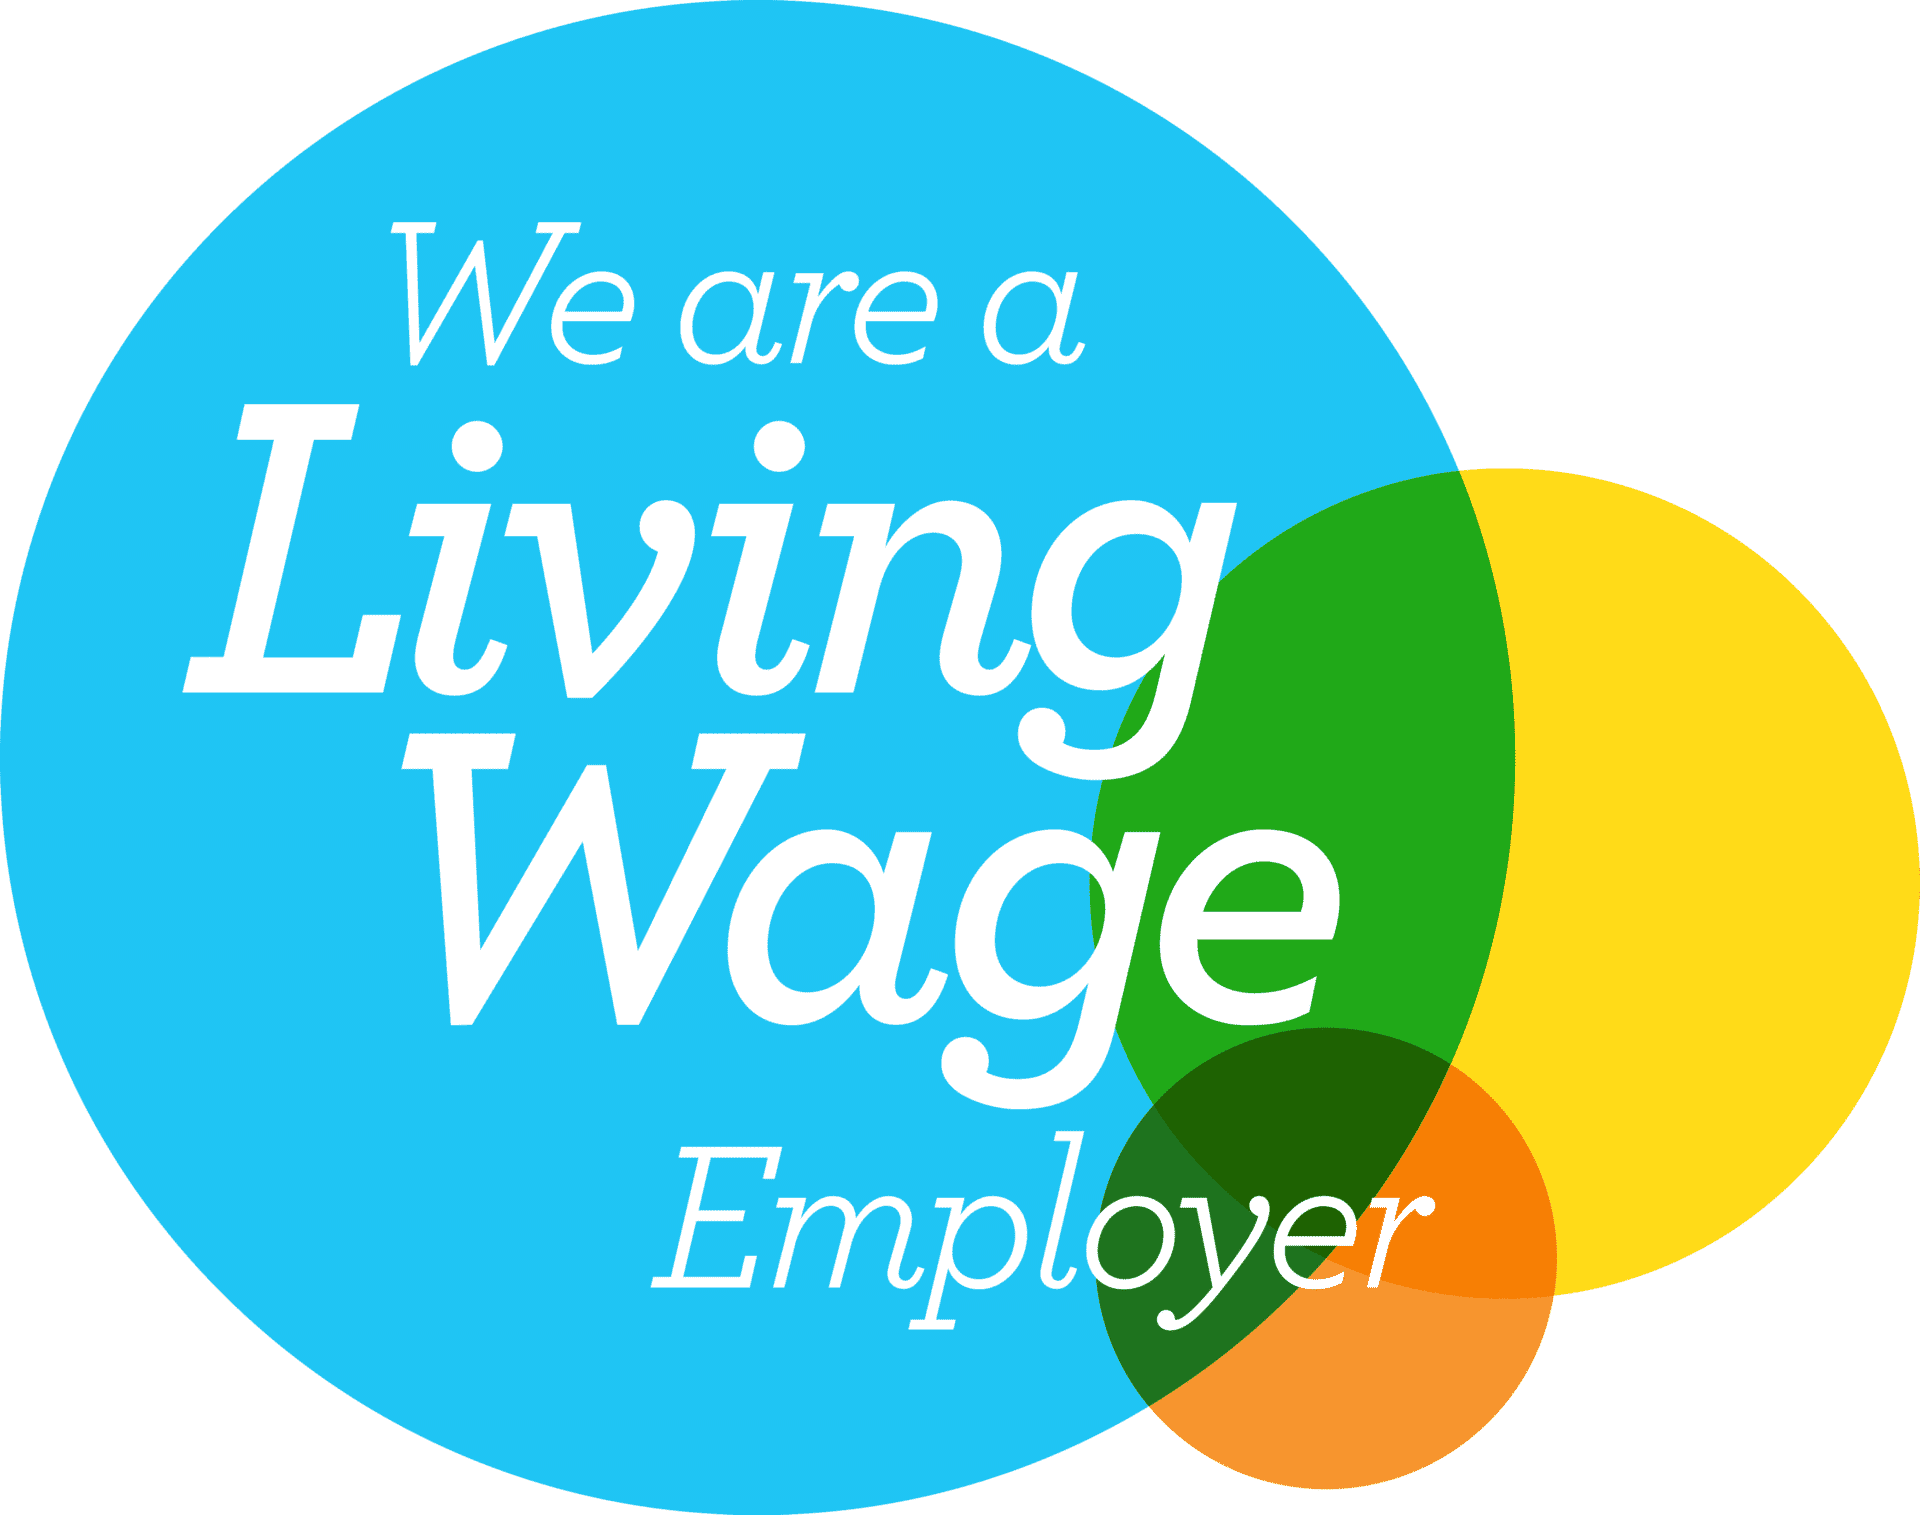 GNA group living wage employer